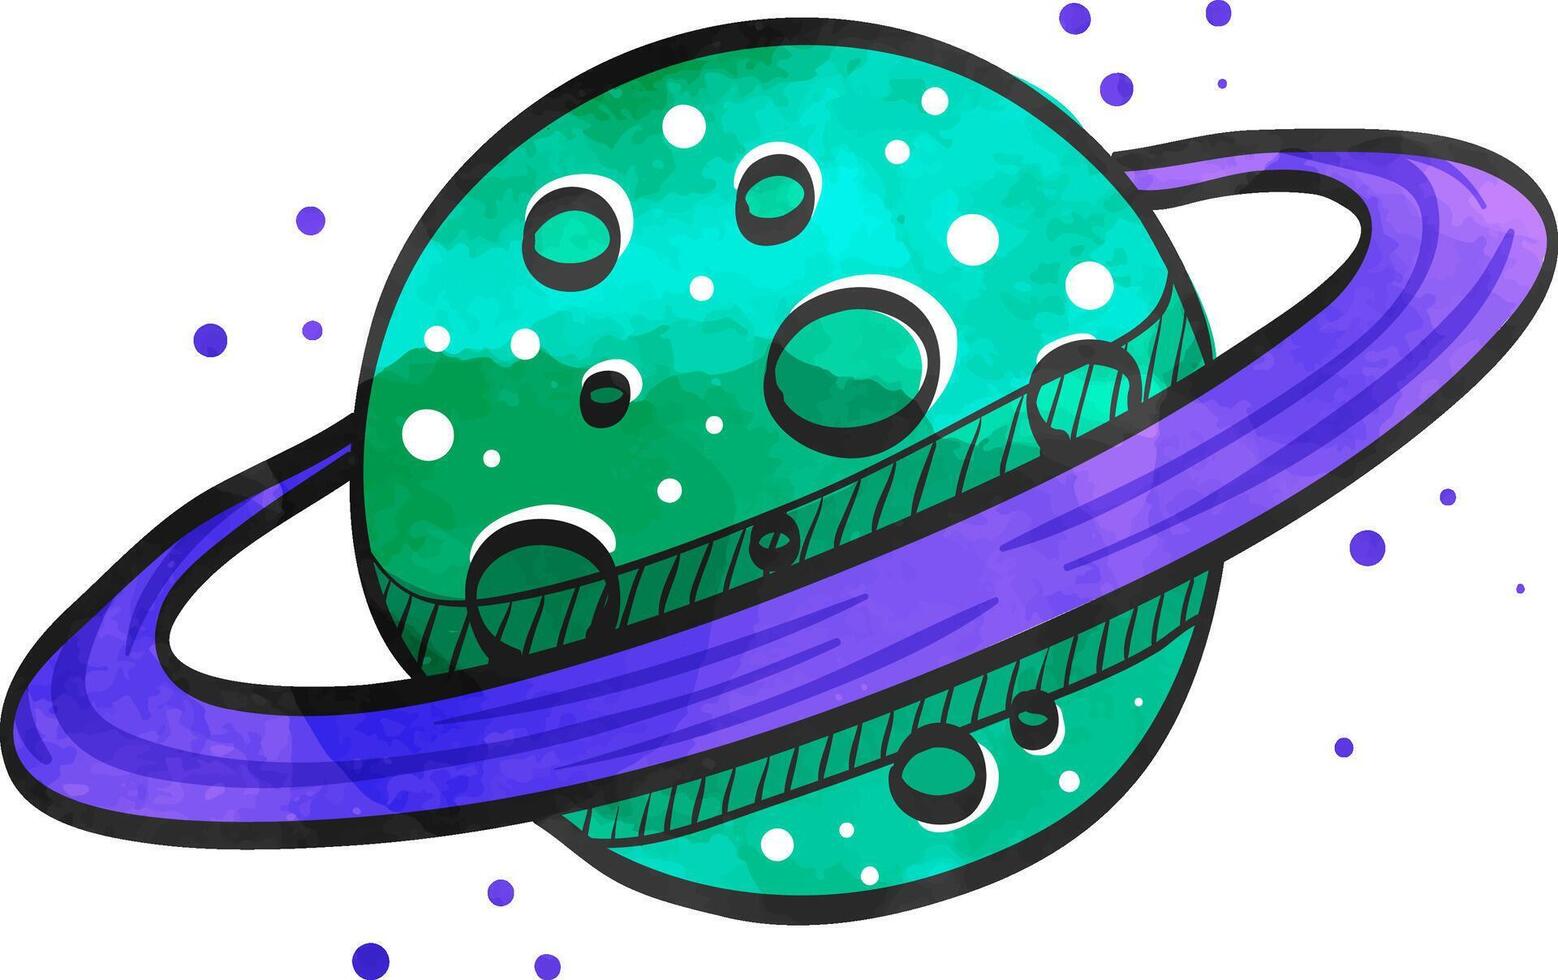 Planet Saturn icon in watercolor style. vector